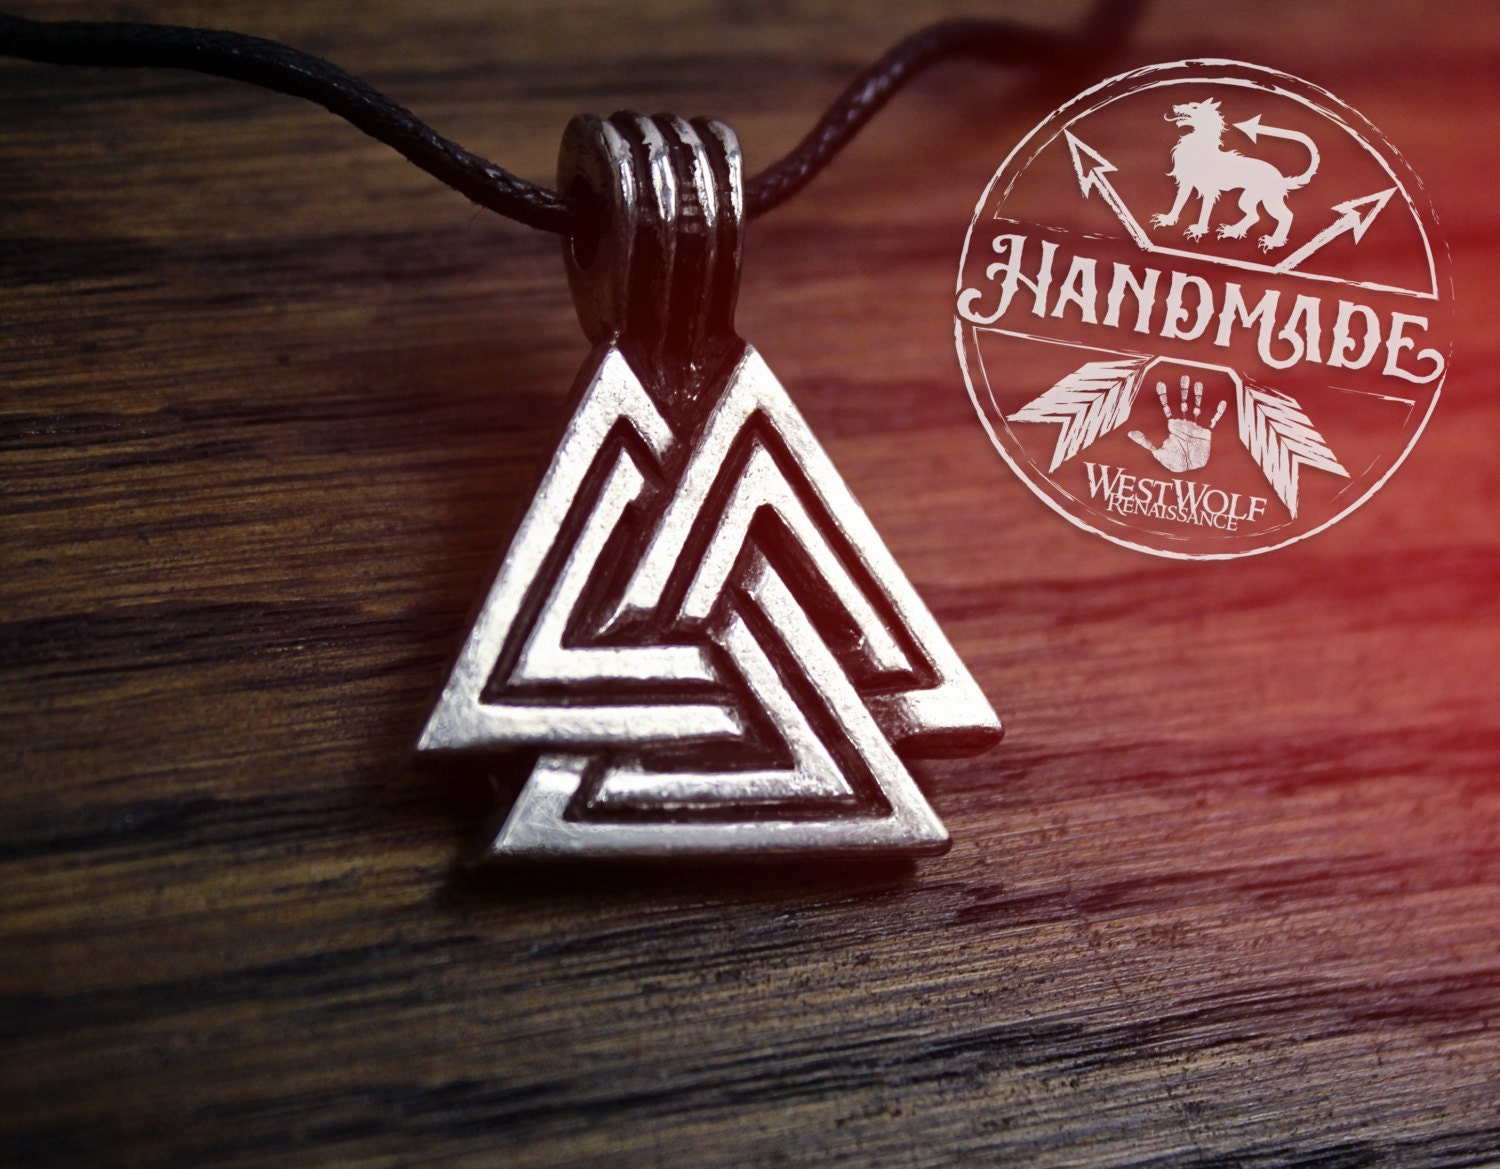 the valknut meaning